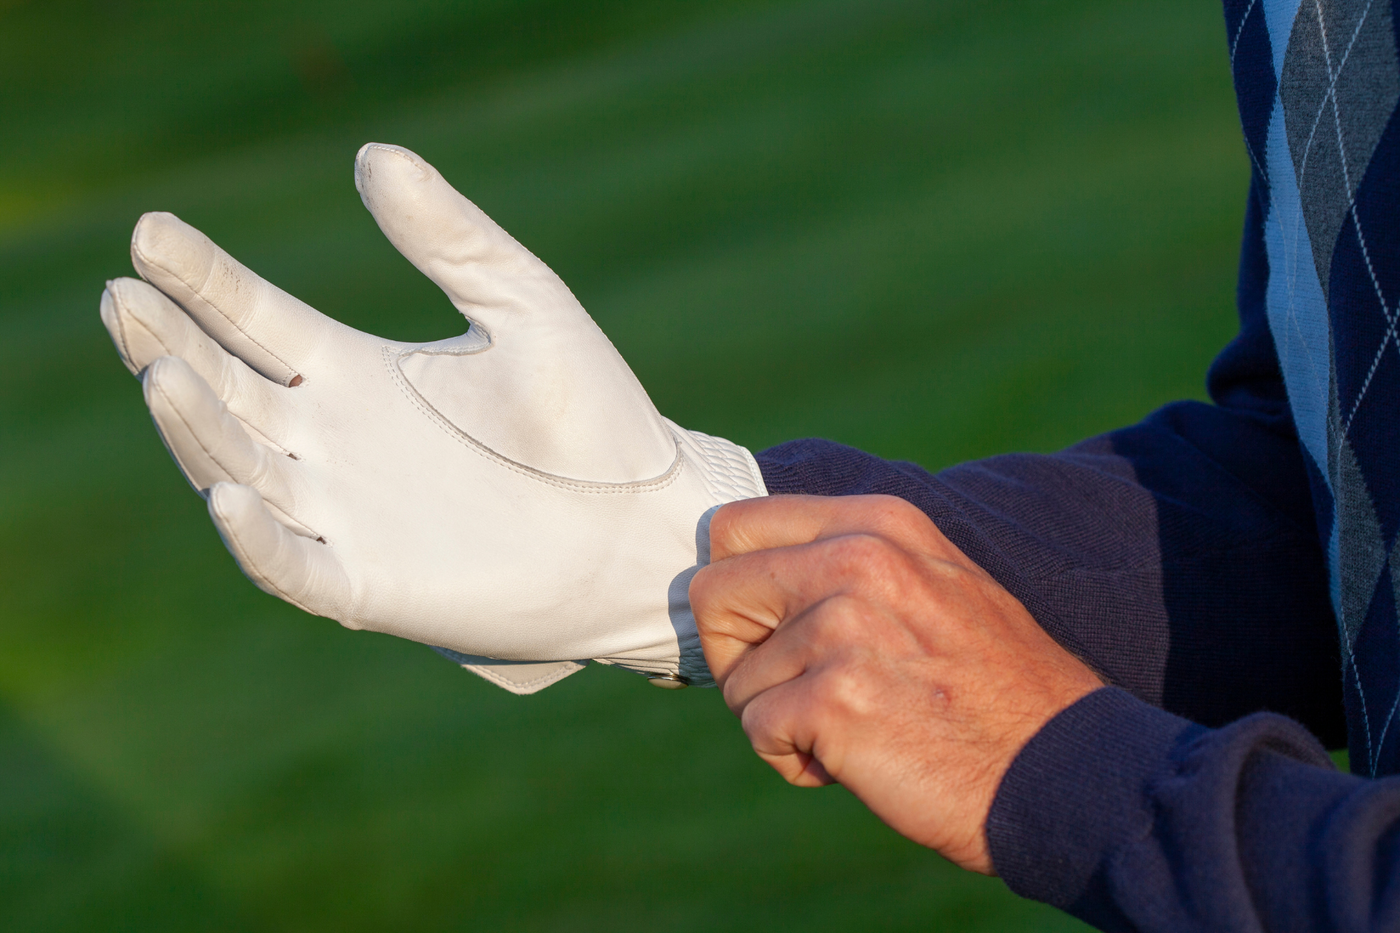 The Ultimate Guide: How to Wash Your Golf Gloves - Red Moose